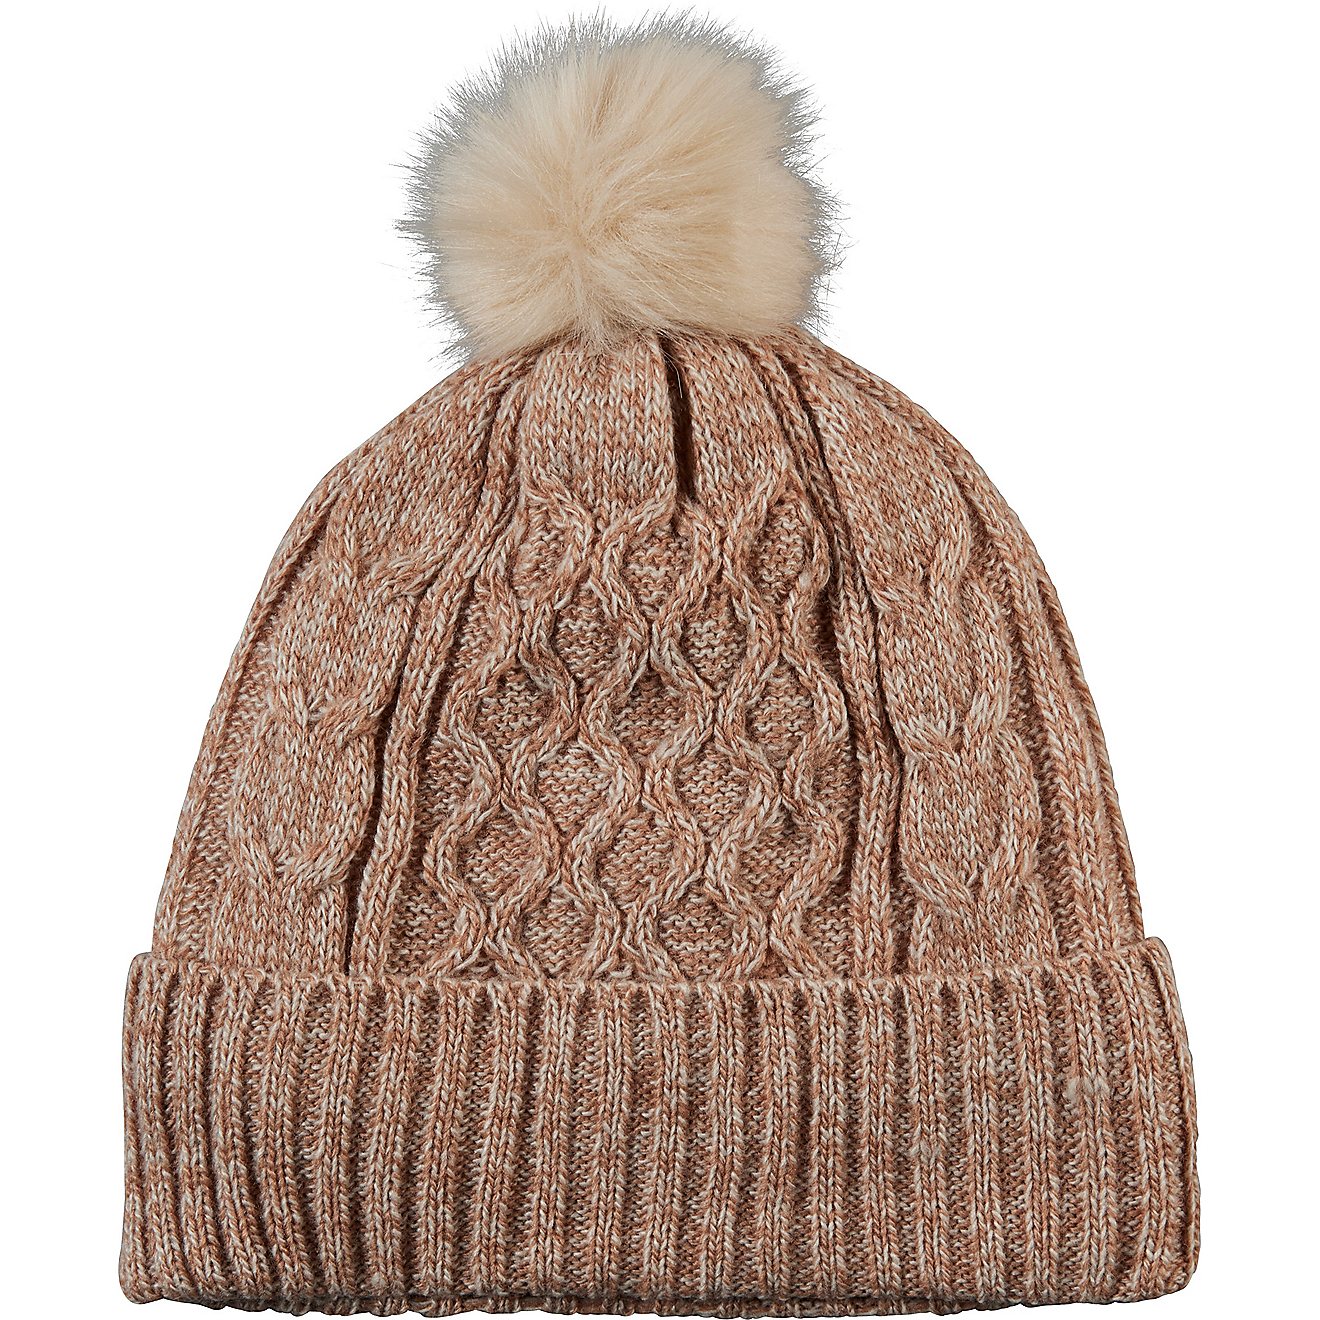 Magellan Outdoors Women's Cable Knit Beanie Hat                                                                                  - view number 1